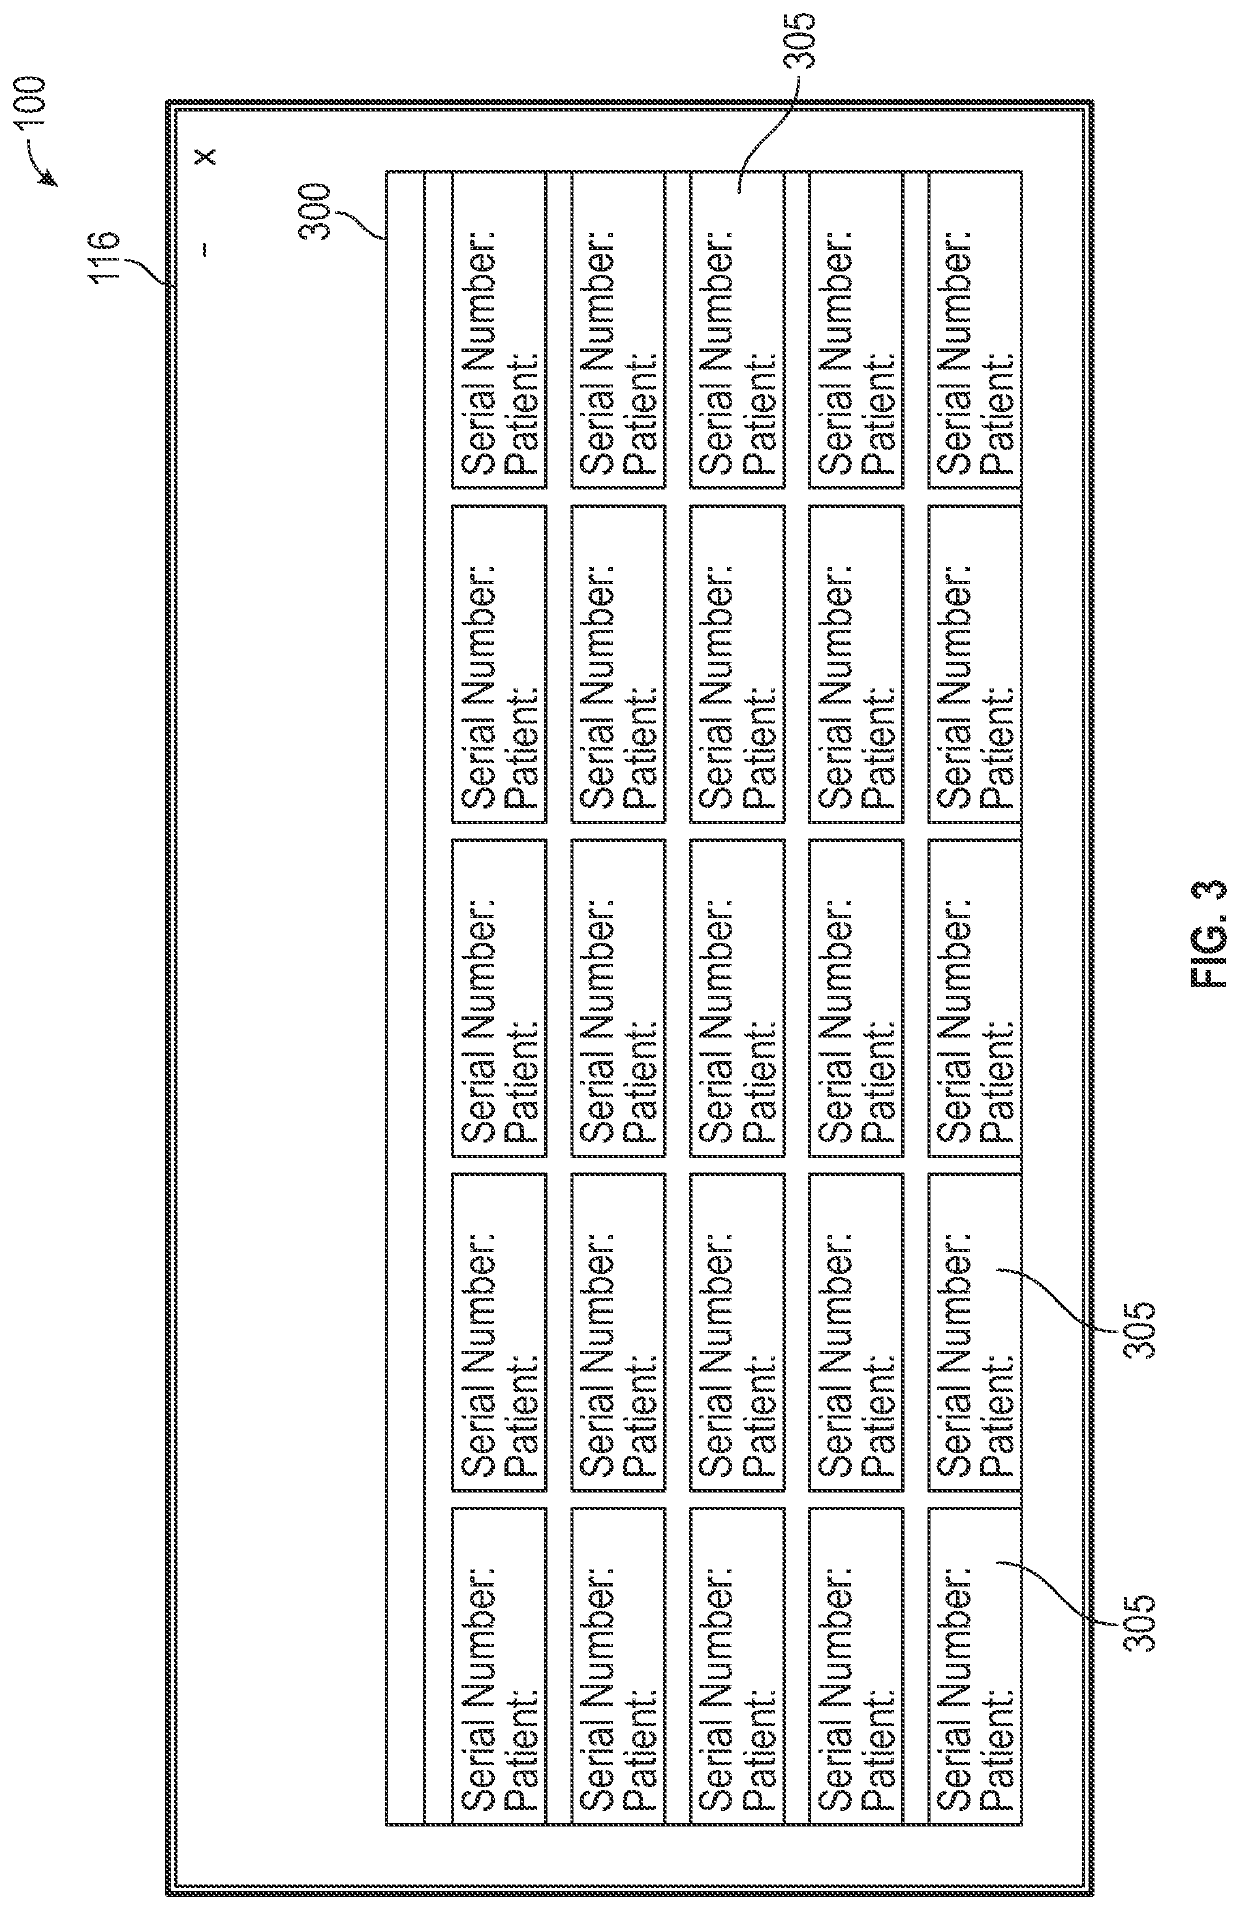 Monitoring system and user interface for monitoring implantable disordered breathing treatment systems